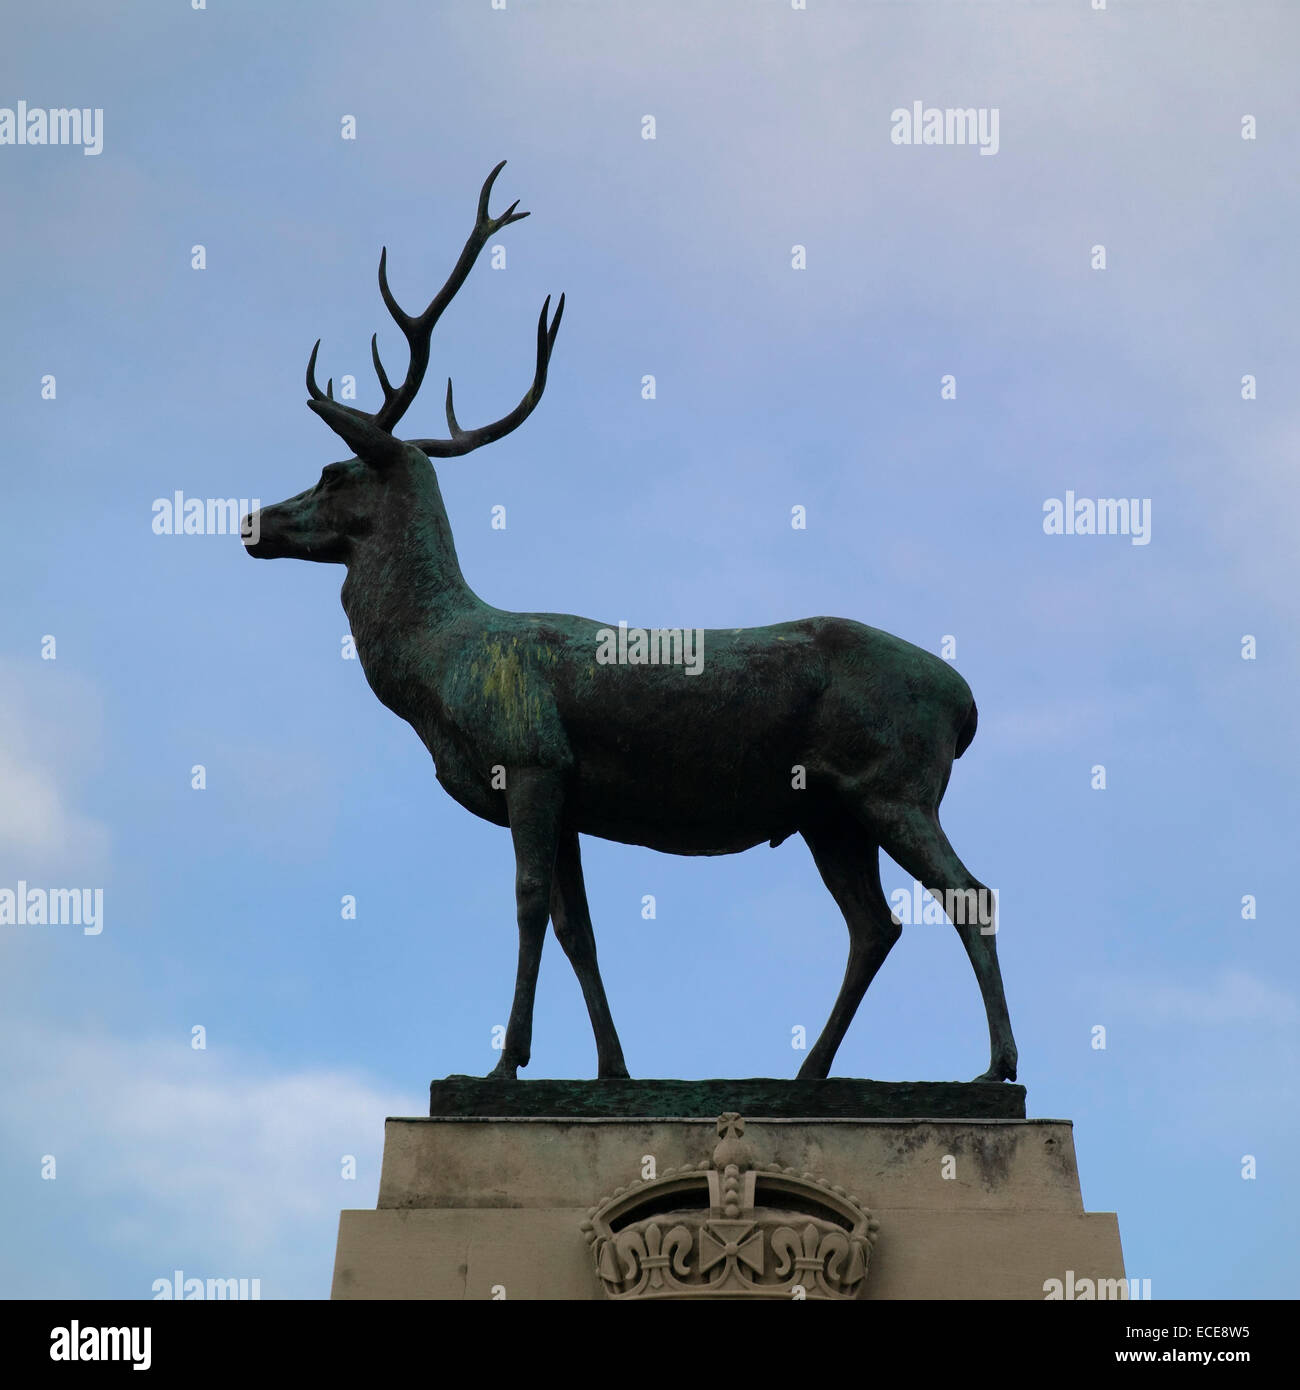 Stag statue in parliment square hertford Stock Photo